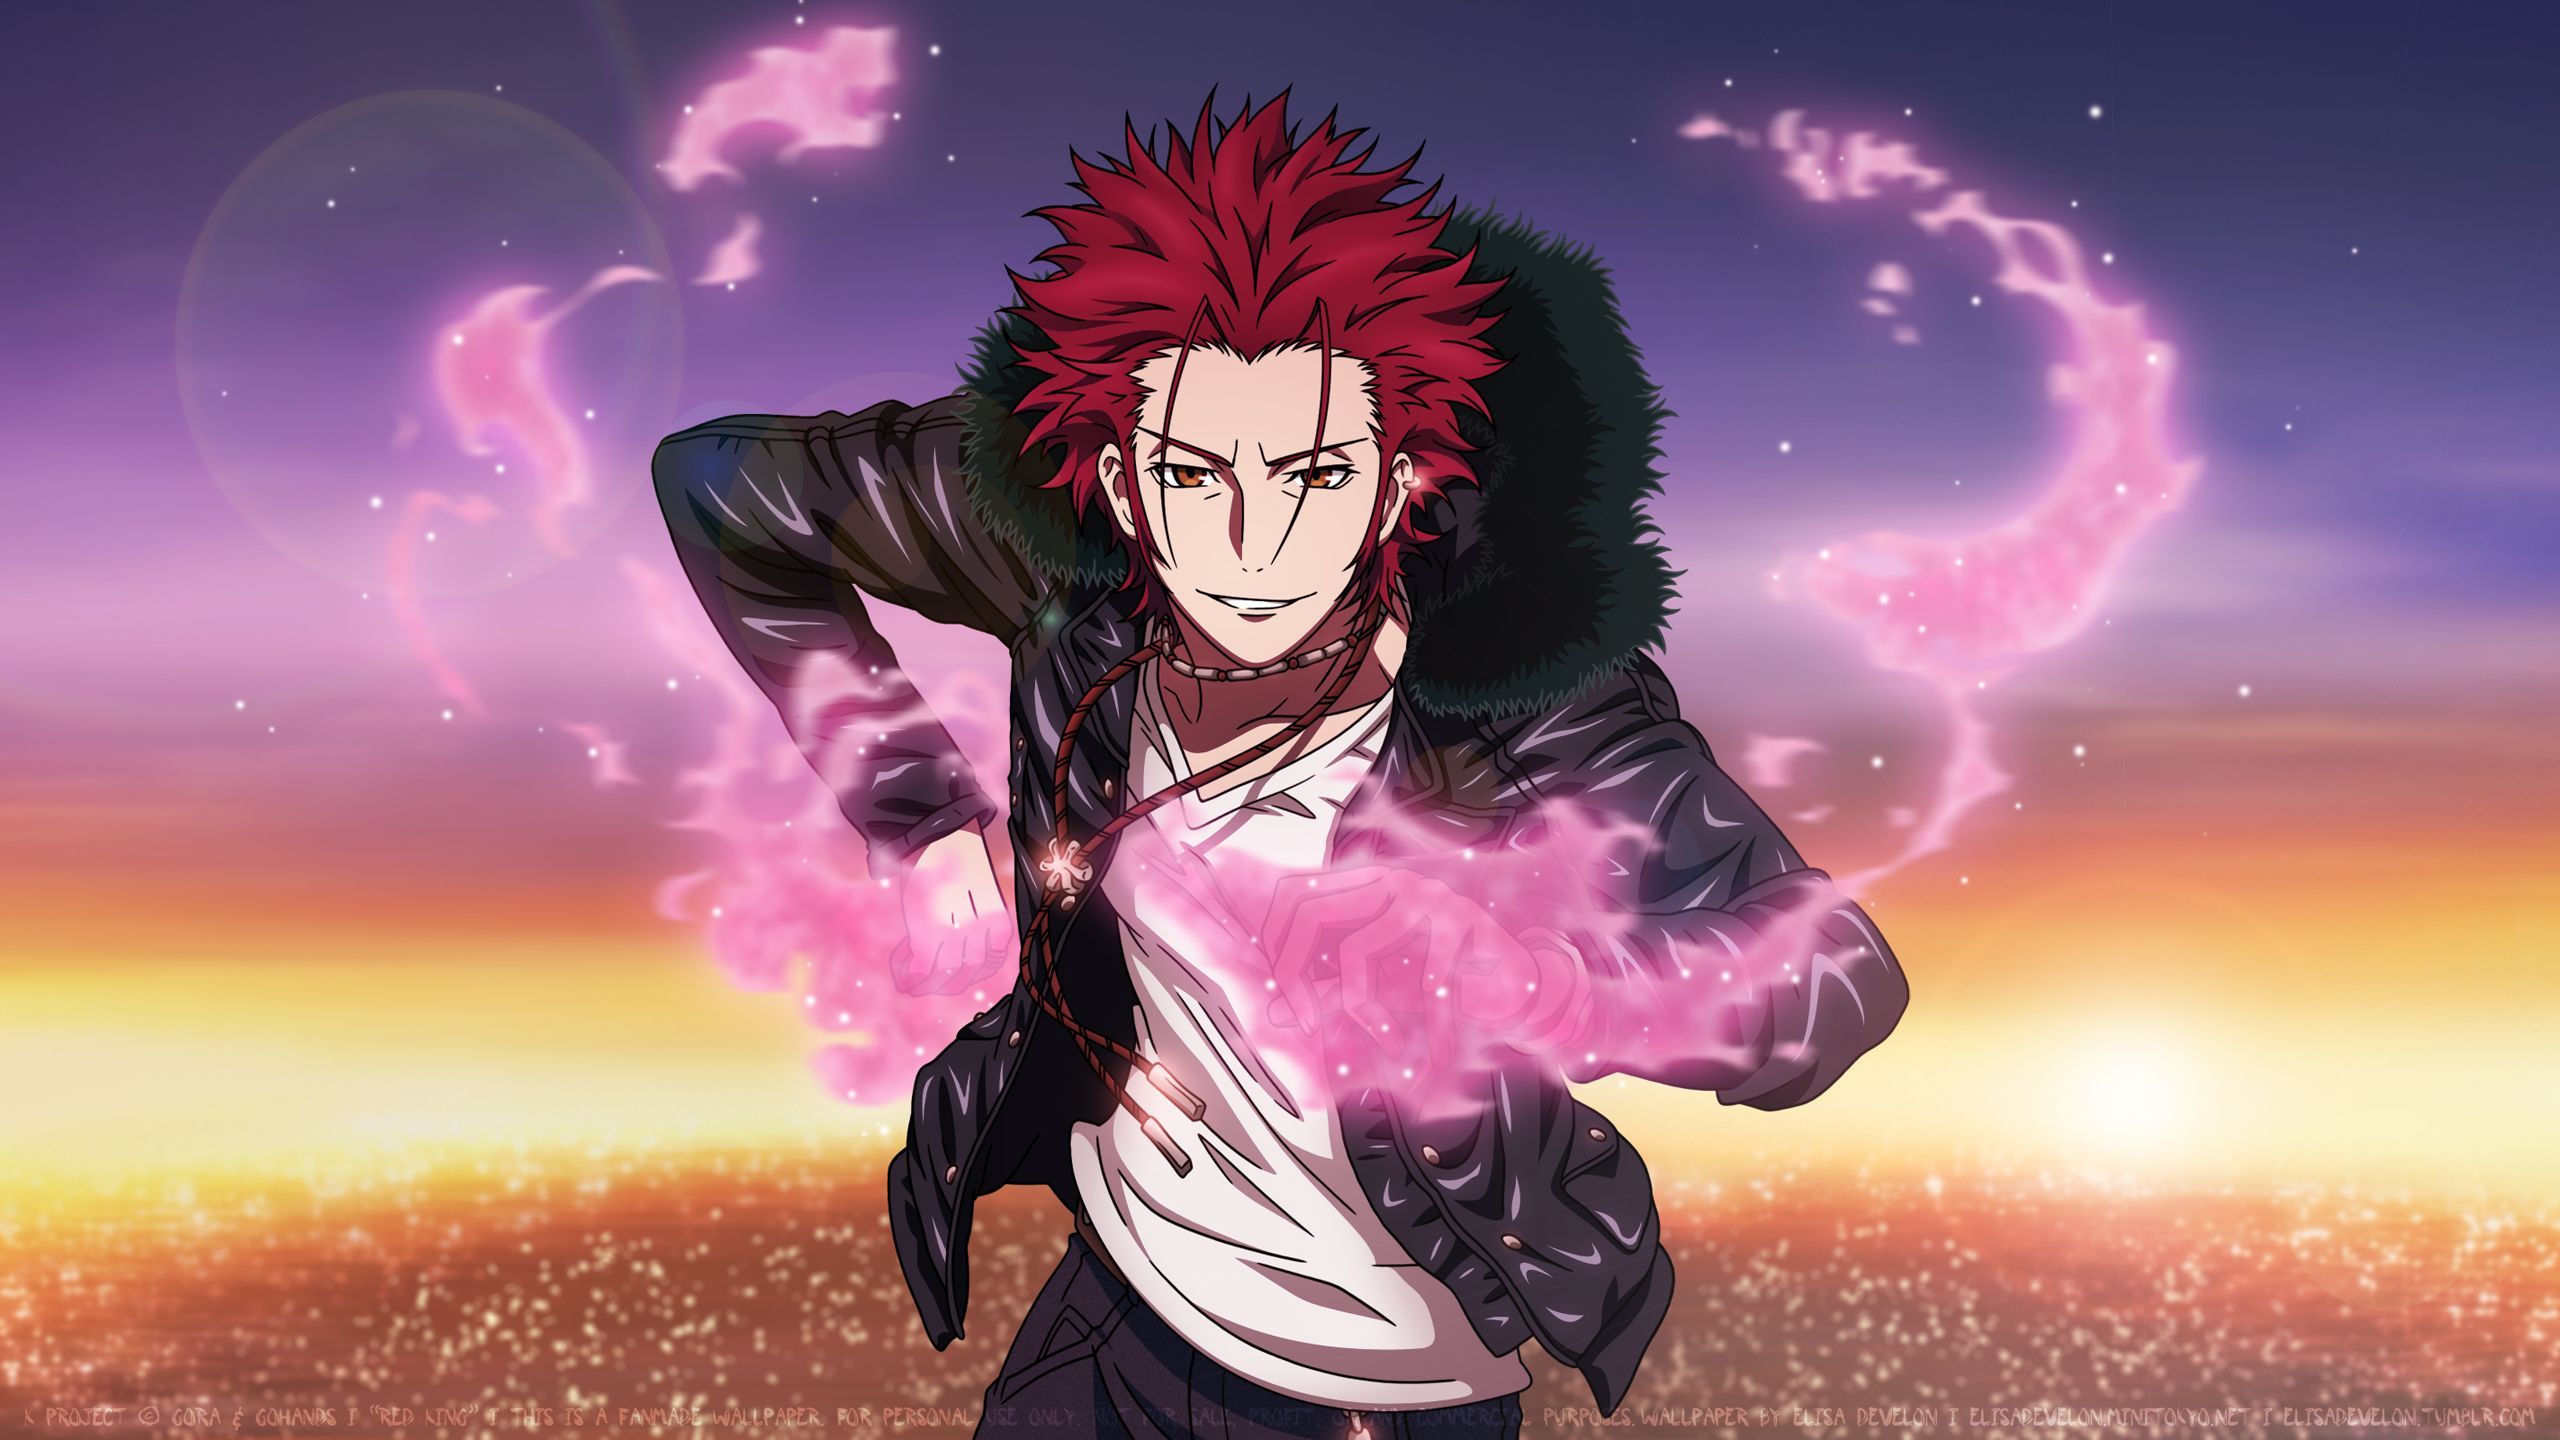 Suoh Mikoto/. K project, K project anime, Anime